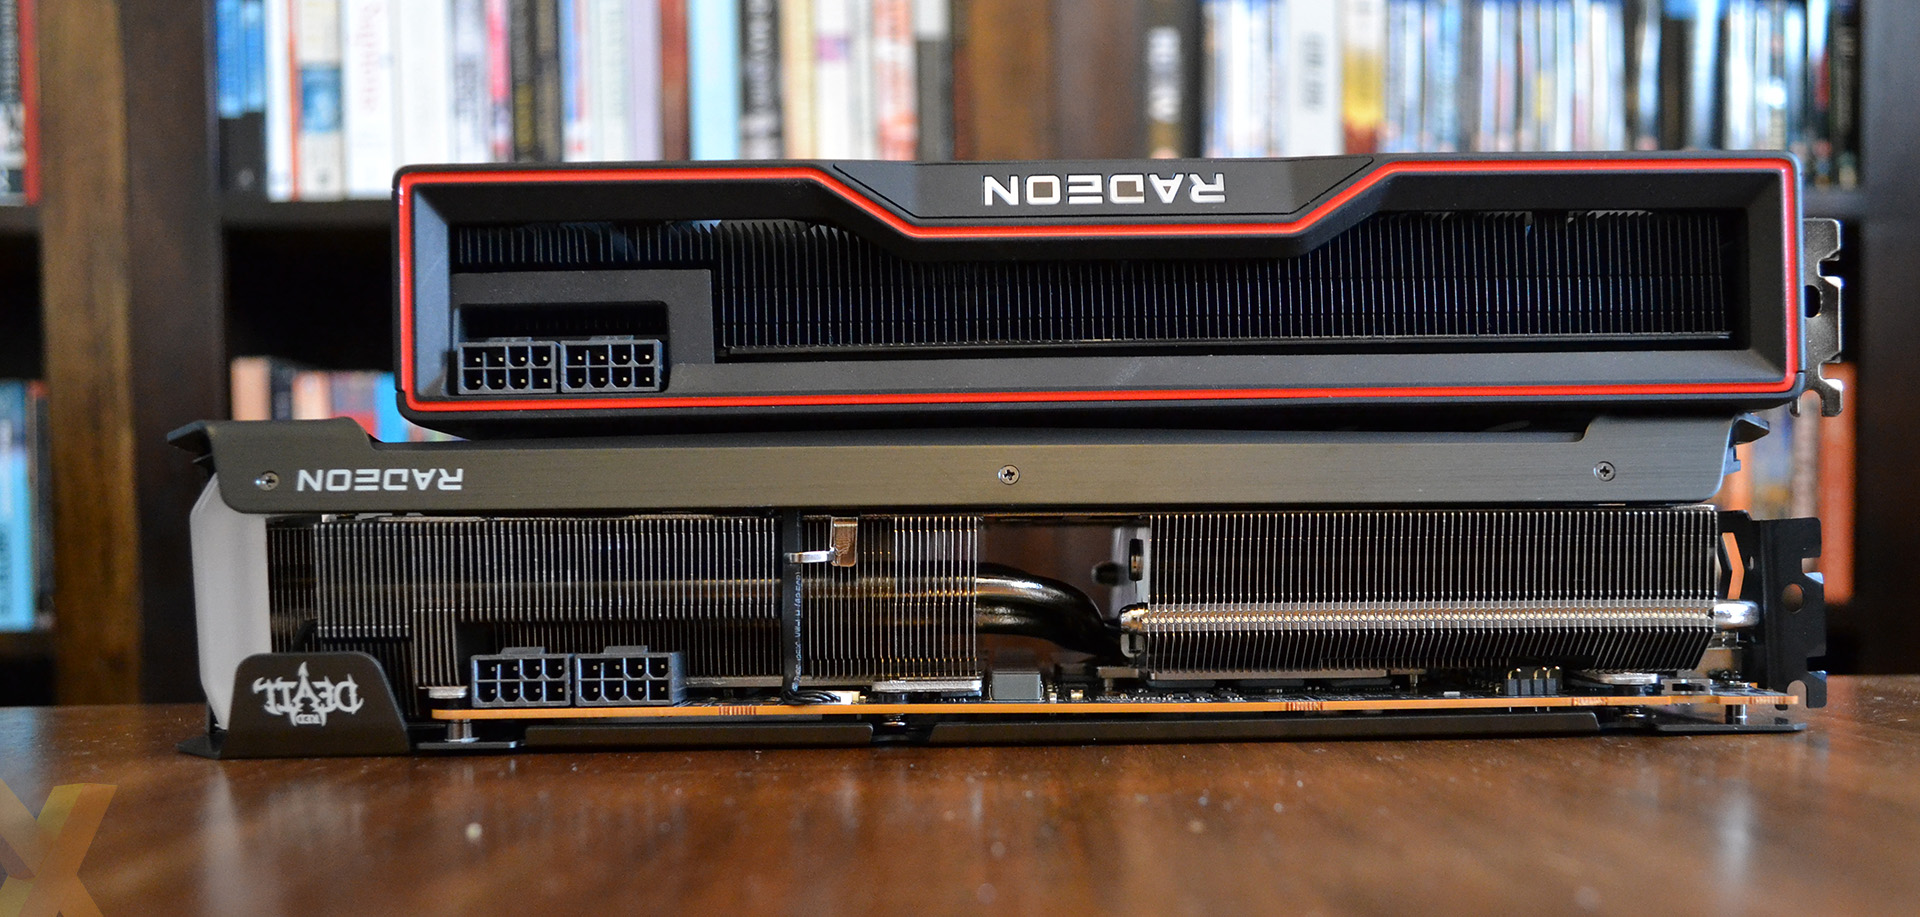 Review: PowerColor Radeon RX 6800 XT Red Devil Limited Edition